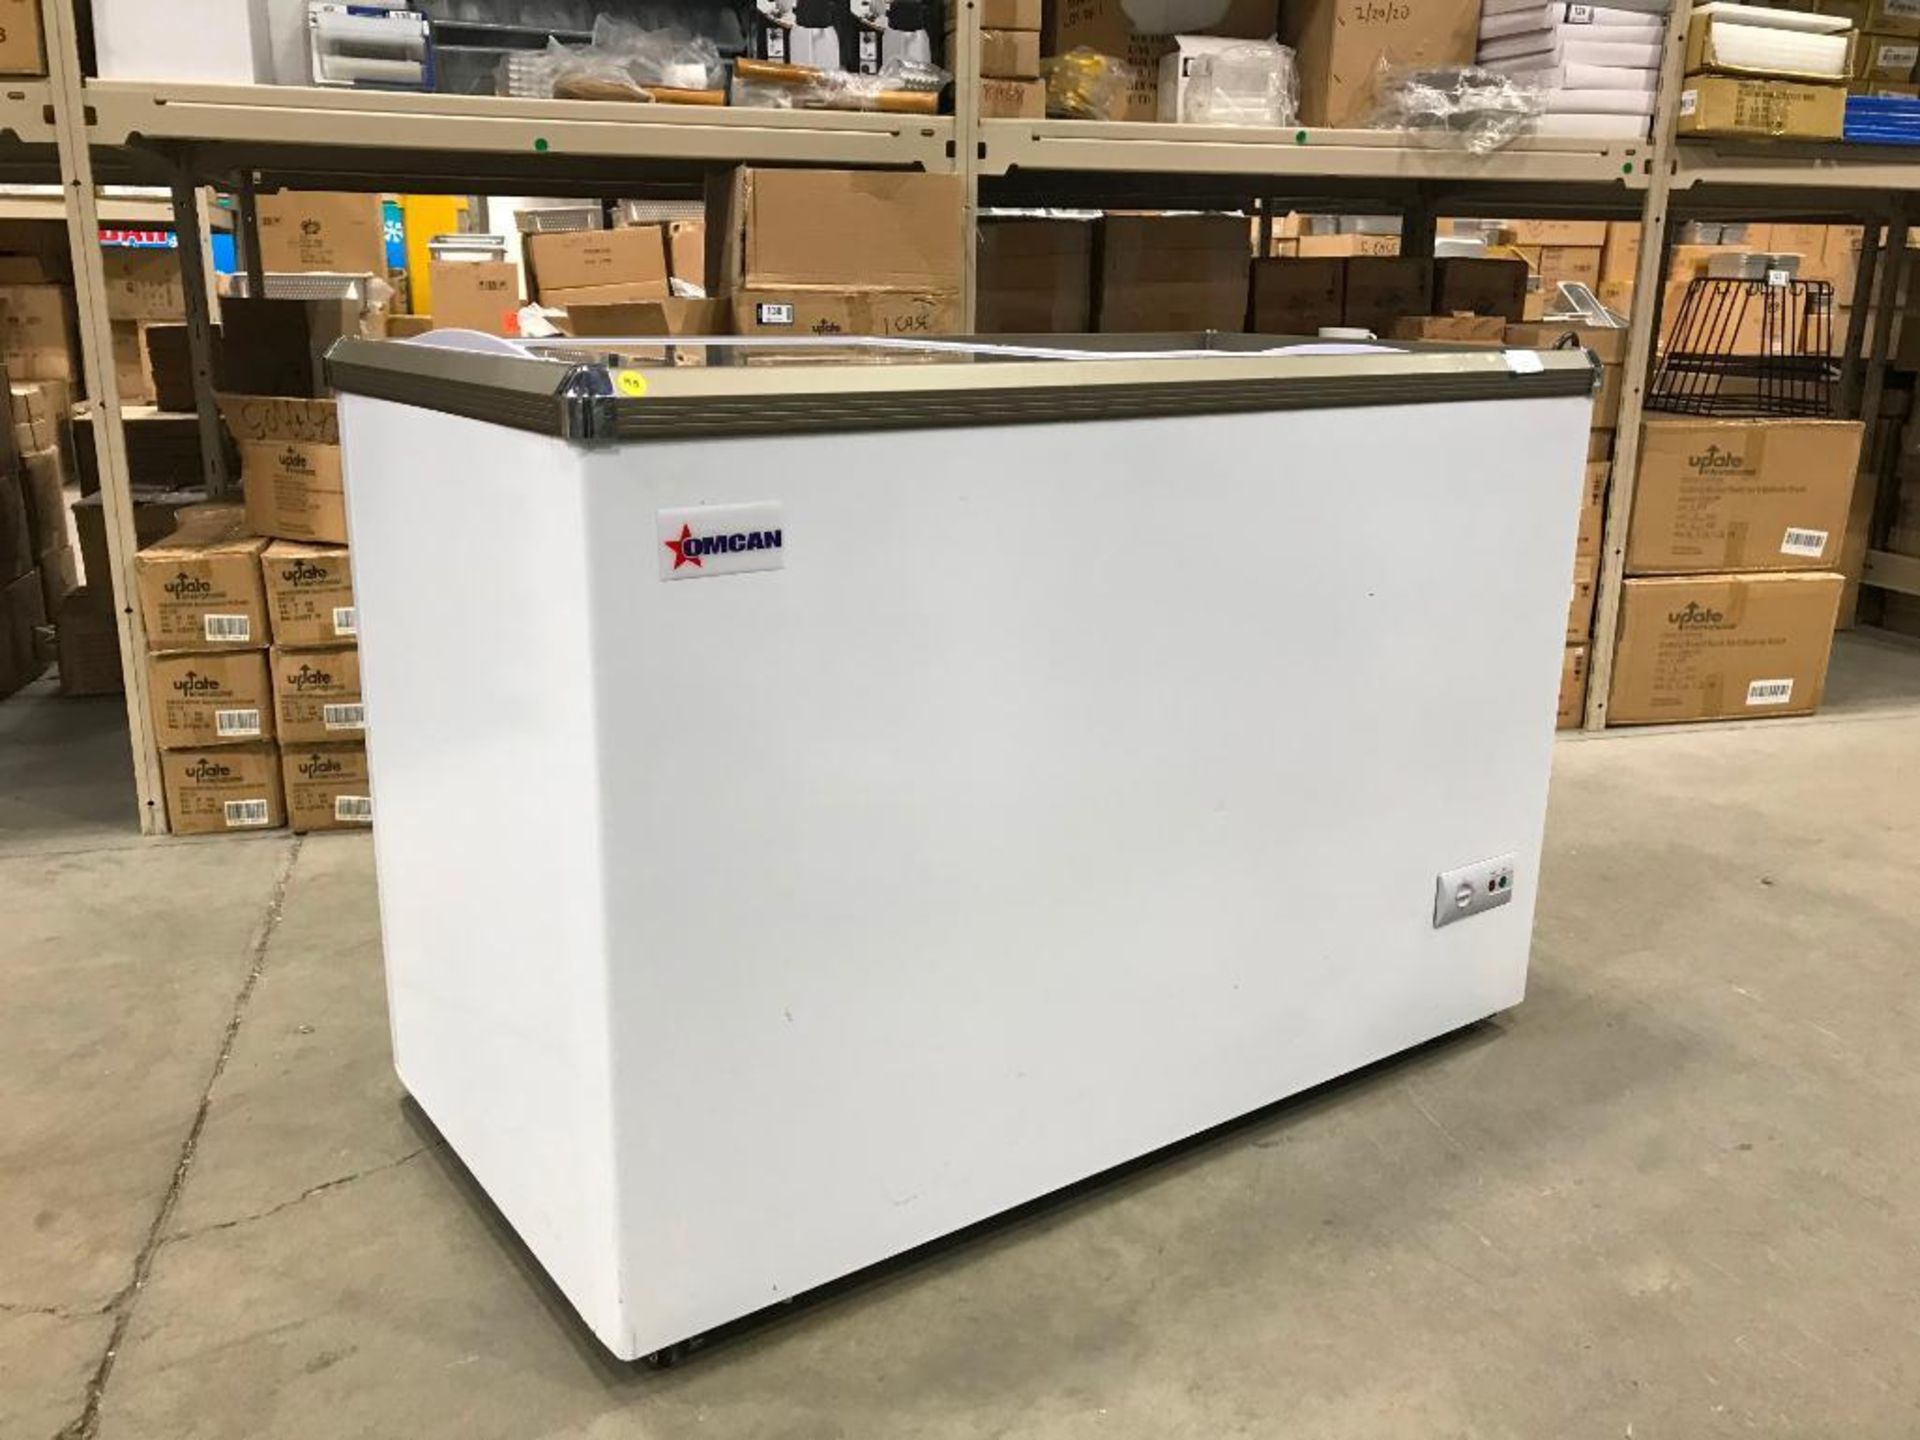 45.7" ICE CREAM DISPLAY CHEST FREEZER WITH FLAT GLASS TOP - OMCAN 45293 - Image 2 of 9